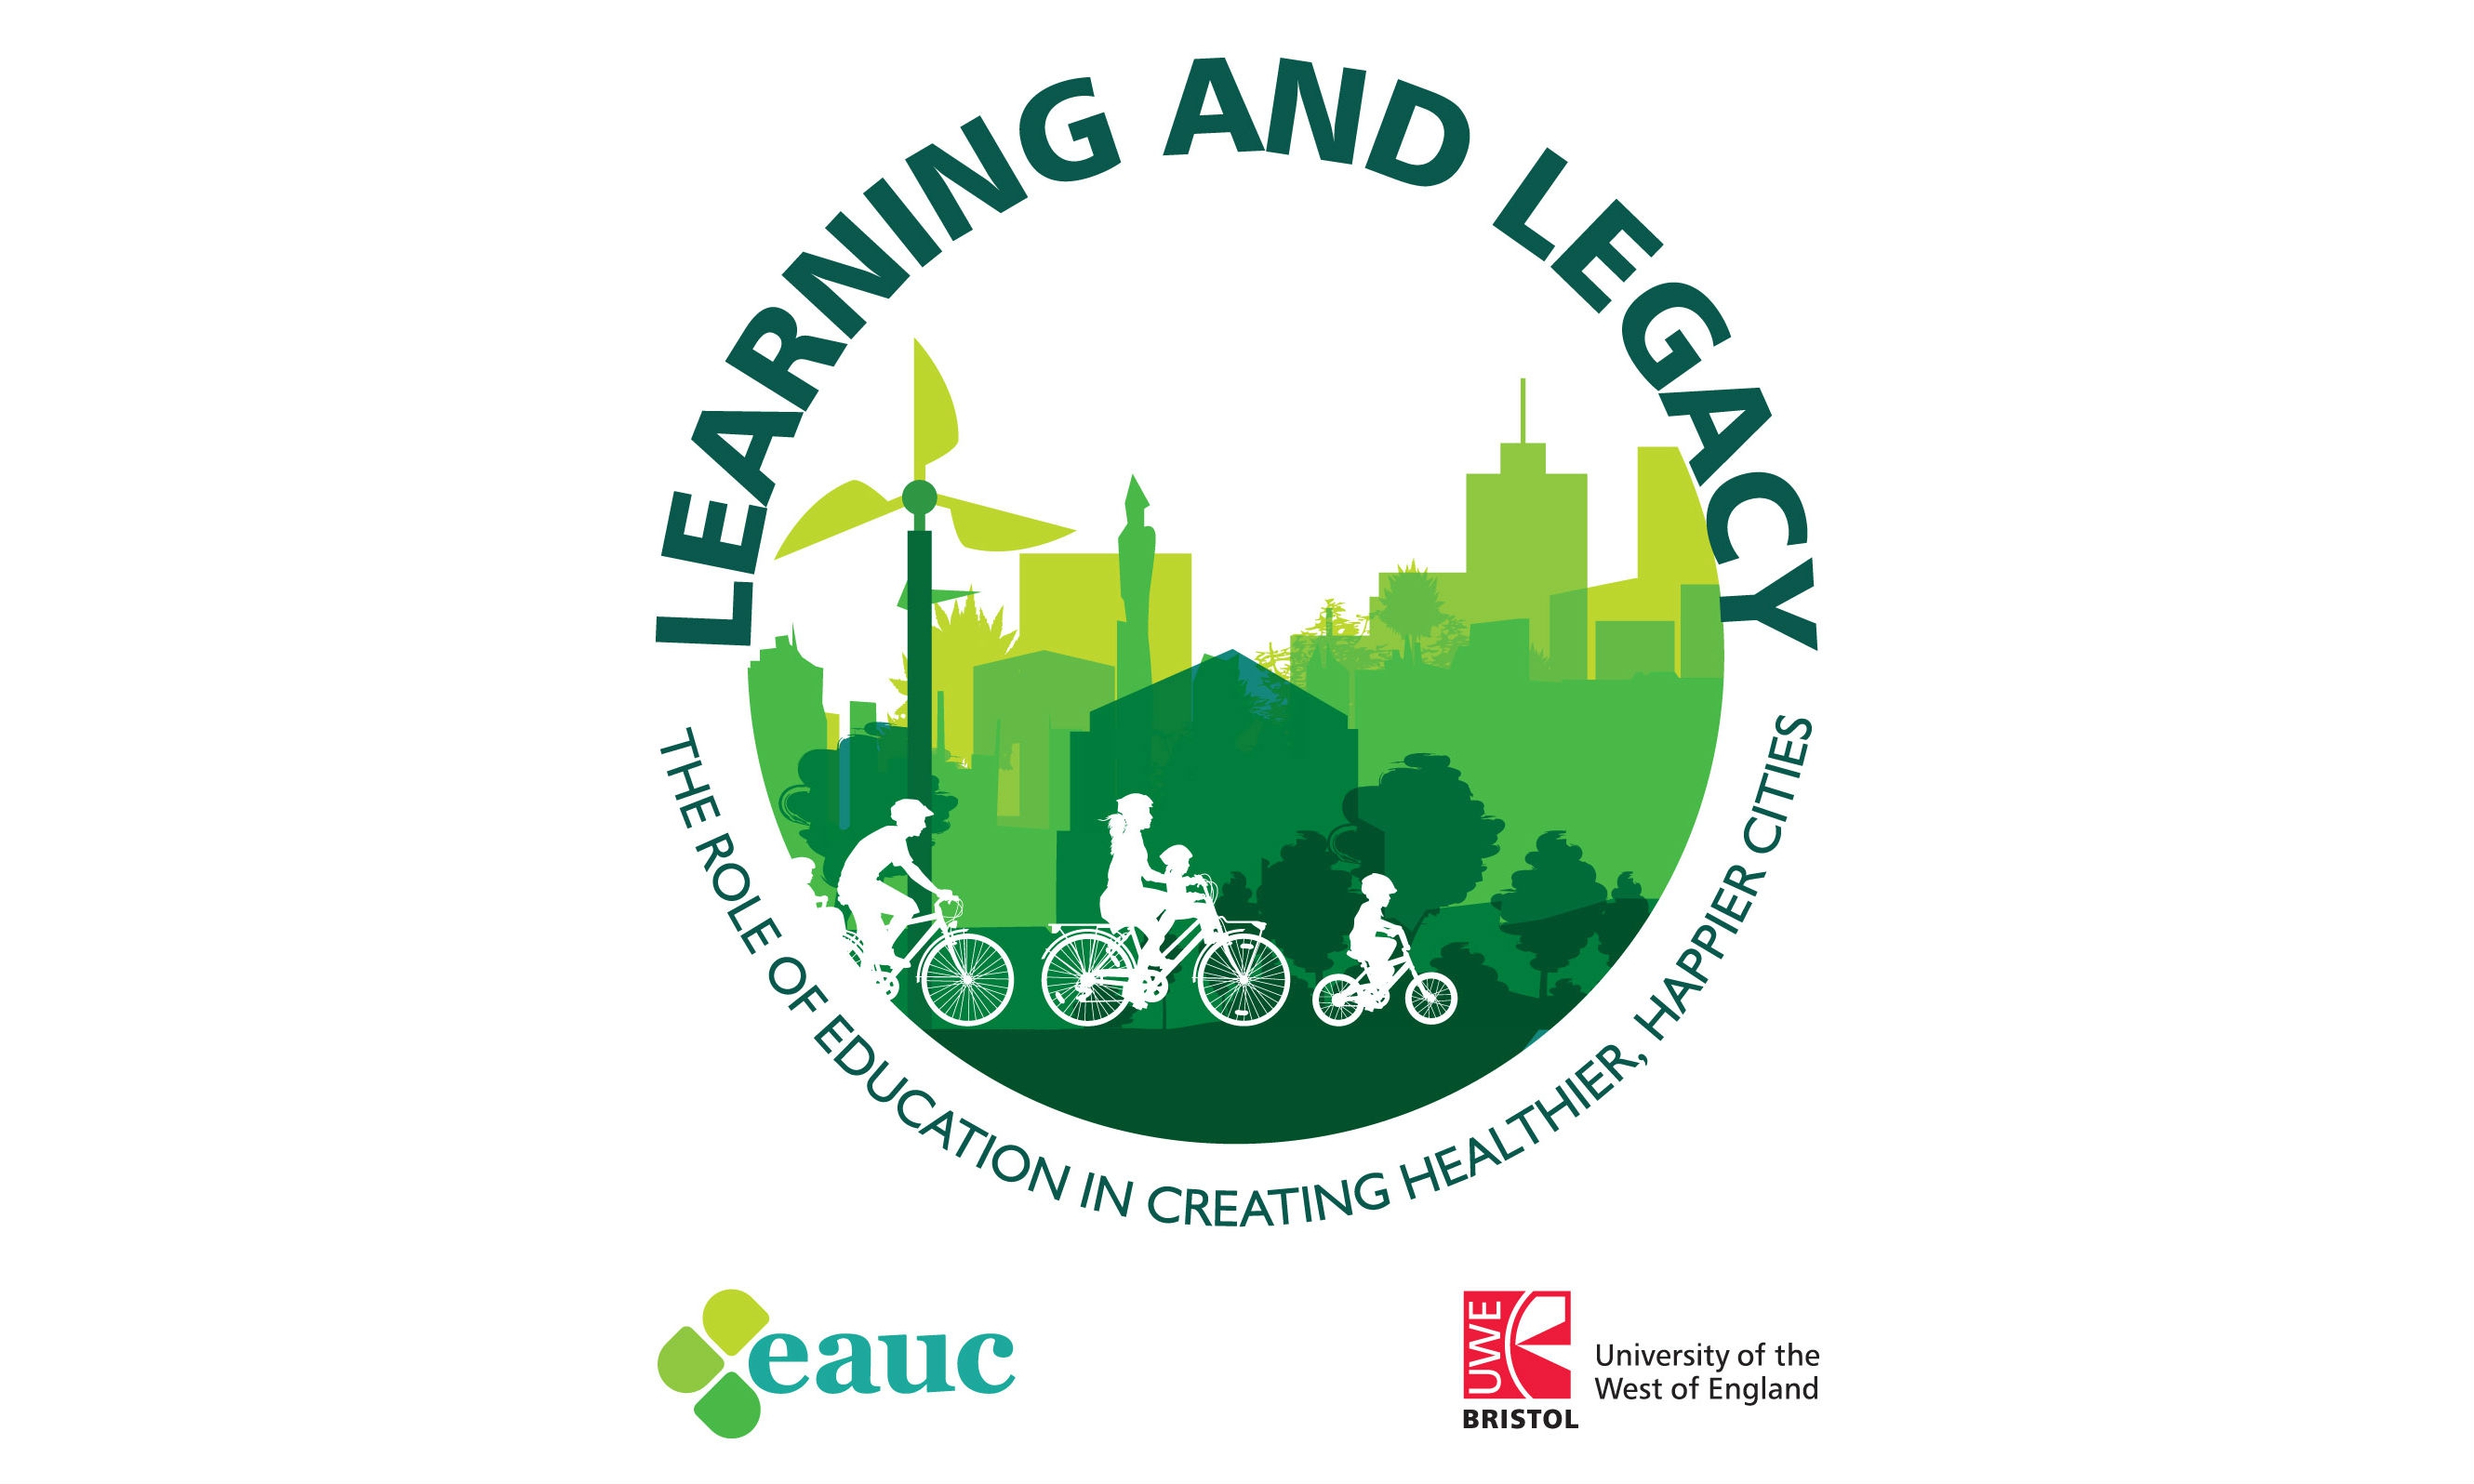 The 2016 EAUC Annual Conference